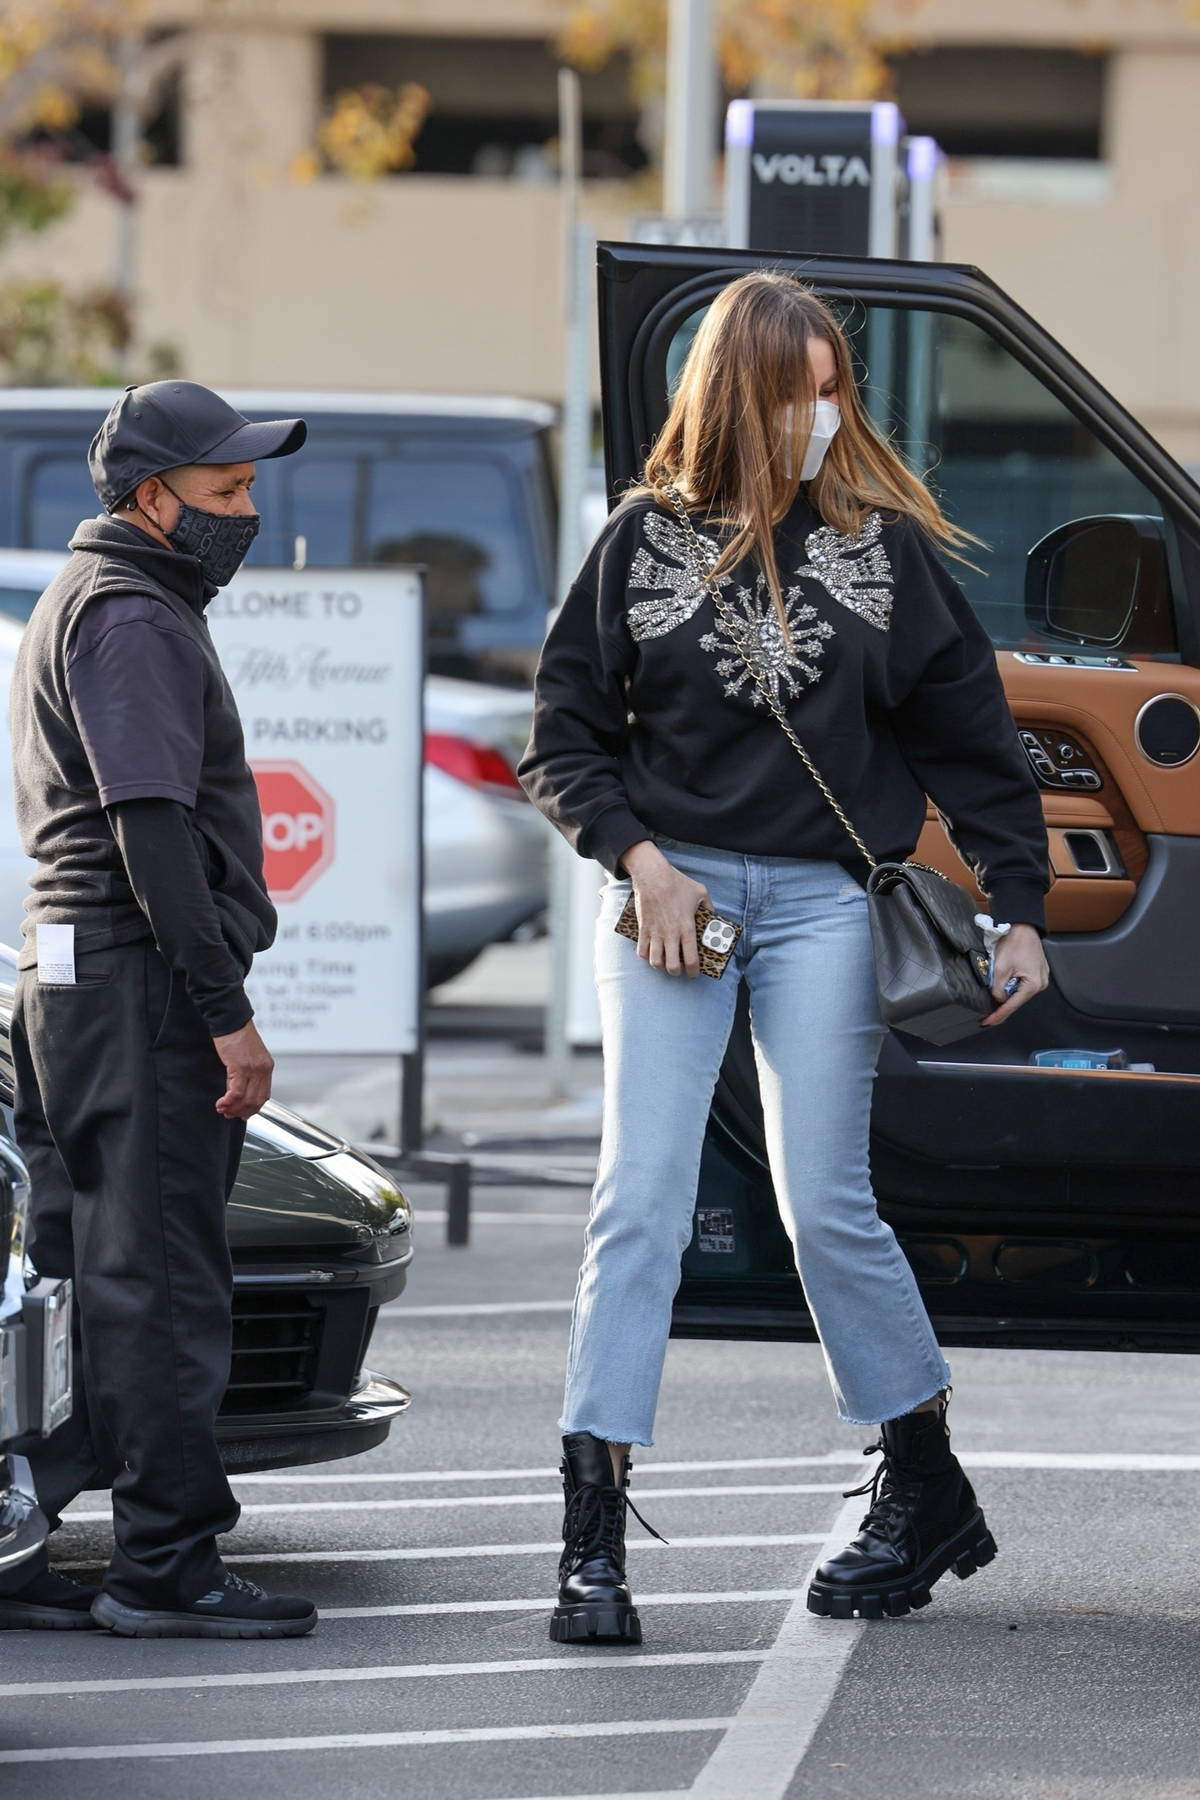 https://www.celebsfirst.com/wp-content/uploads/2021/12/sofia-vergara-wears-a-black-sweater-with-skin-tight-jeans-as-she-goes-shopping-at-saks-fifth-avenue-in-beverly-hills-california-151221_1.jpg